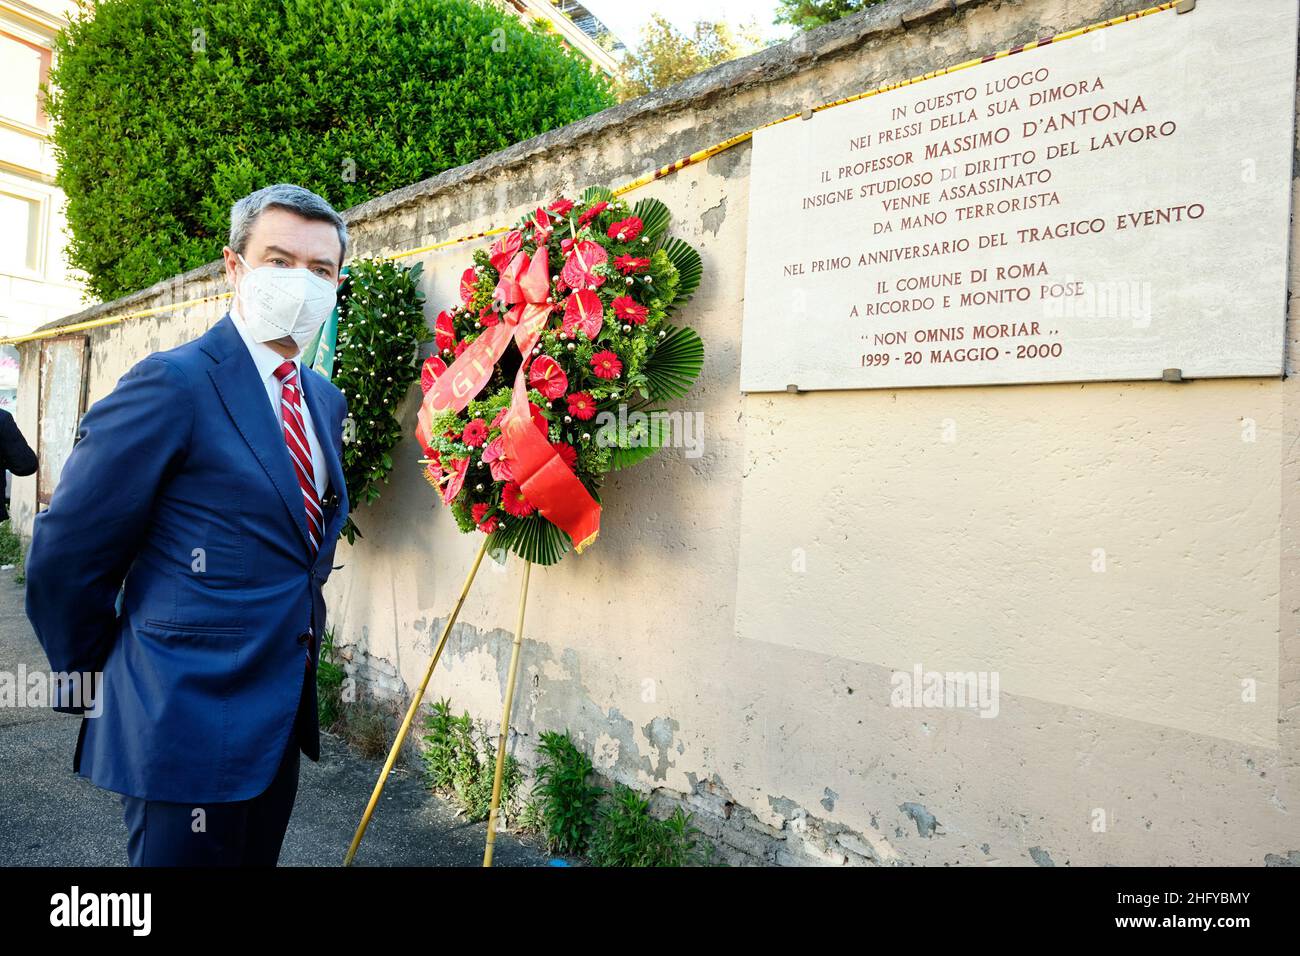 Mauro Scrobogna /LaPresse May 20, 2021 Rome, Italy News Terrorism - anniversary of the murder of D’Antona In the photo: Minister of Labor Andrea Orlando pays tribute to the plaque in memory of Massimo D’Antona killed by the Red Brigades in Via Salaria on 20 May 2000 Stock Photo